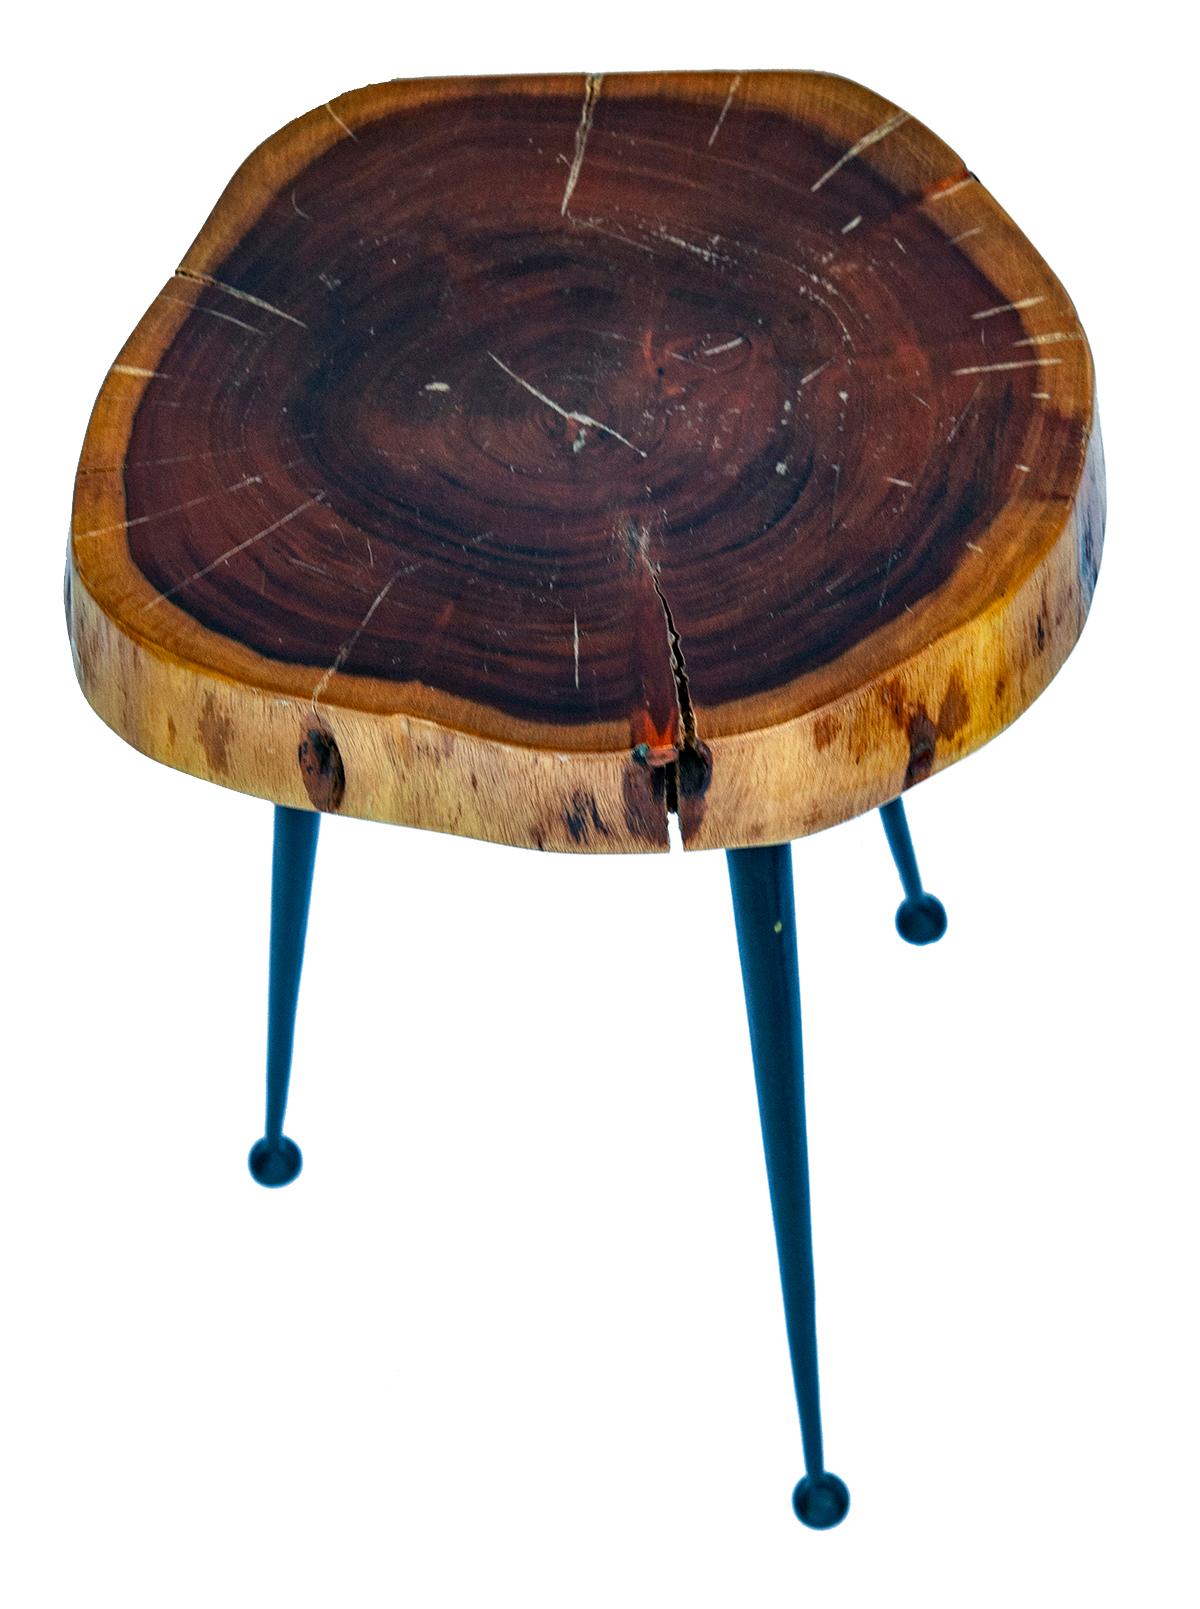 Atomic Age Industrial 3 Legged Table/ Rustic Wood Top  In Good Condition For Sale In Malibu, CA